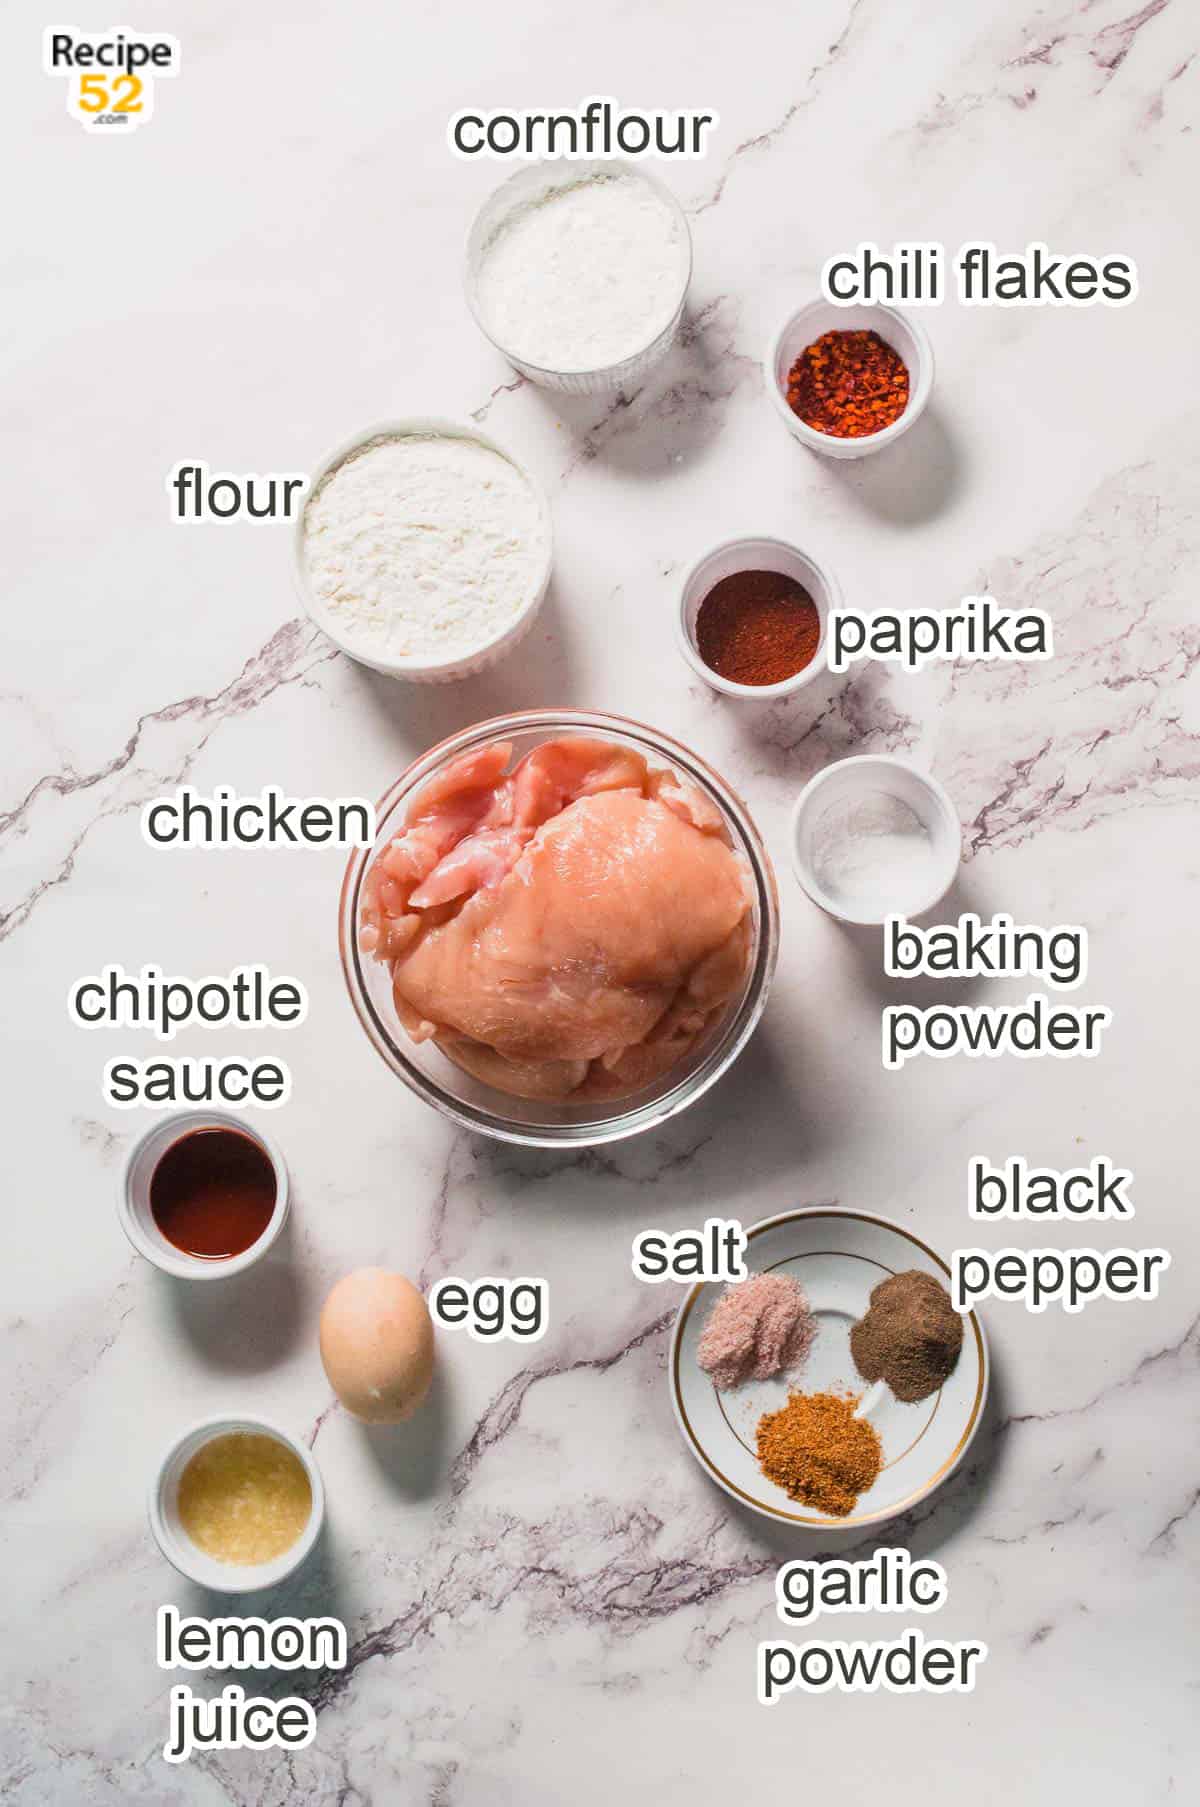 display of ingredients used in chicken sandwich.
